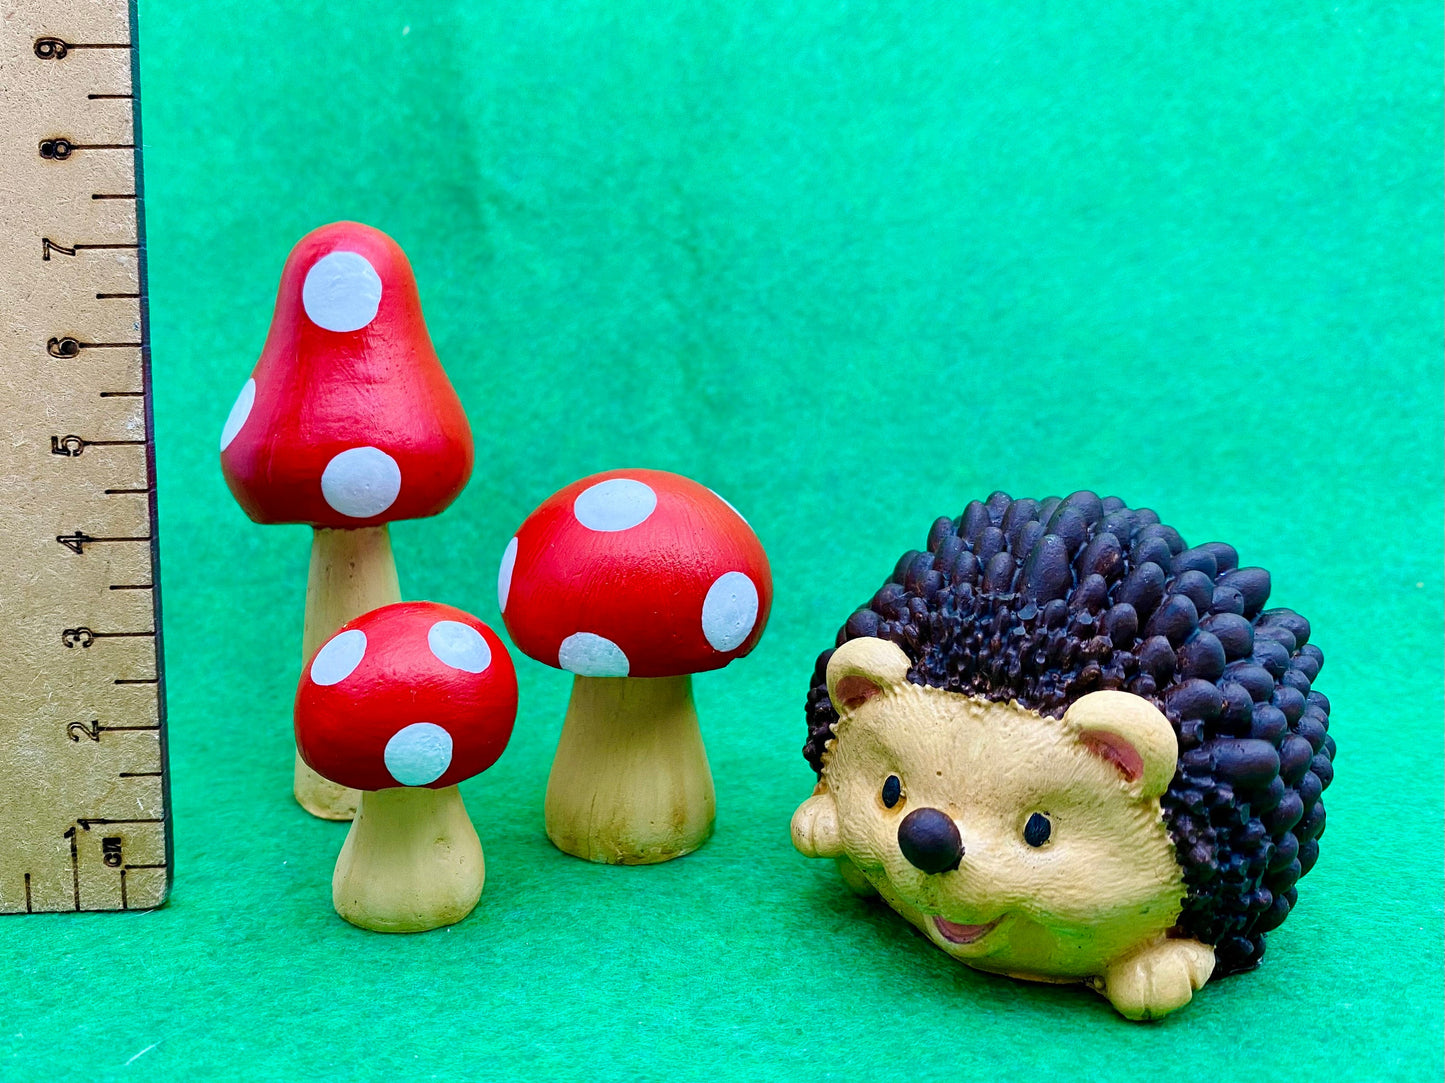 Hand painted Hedgehog and toadstools ornaments next to a ruler